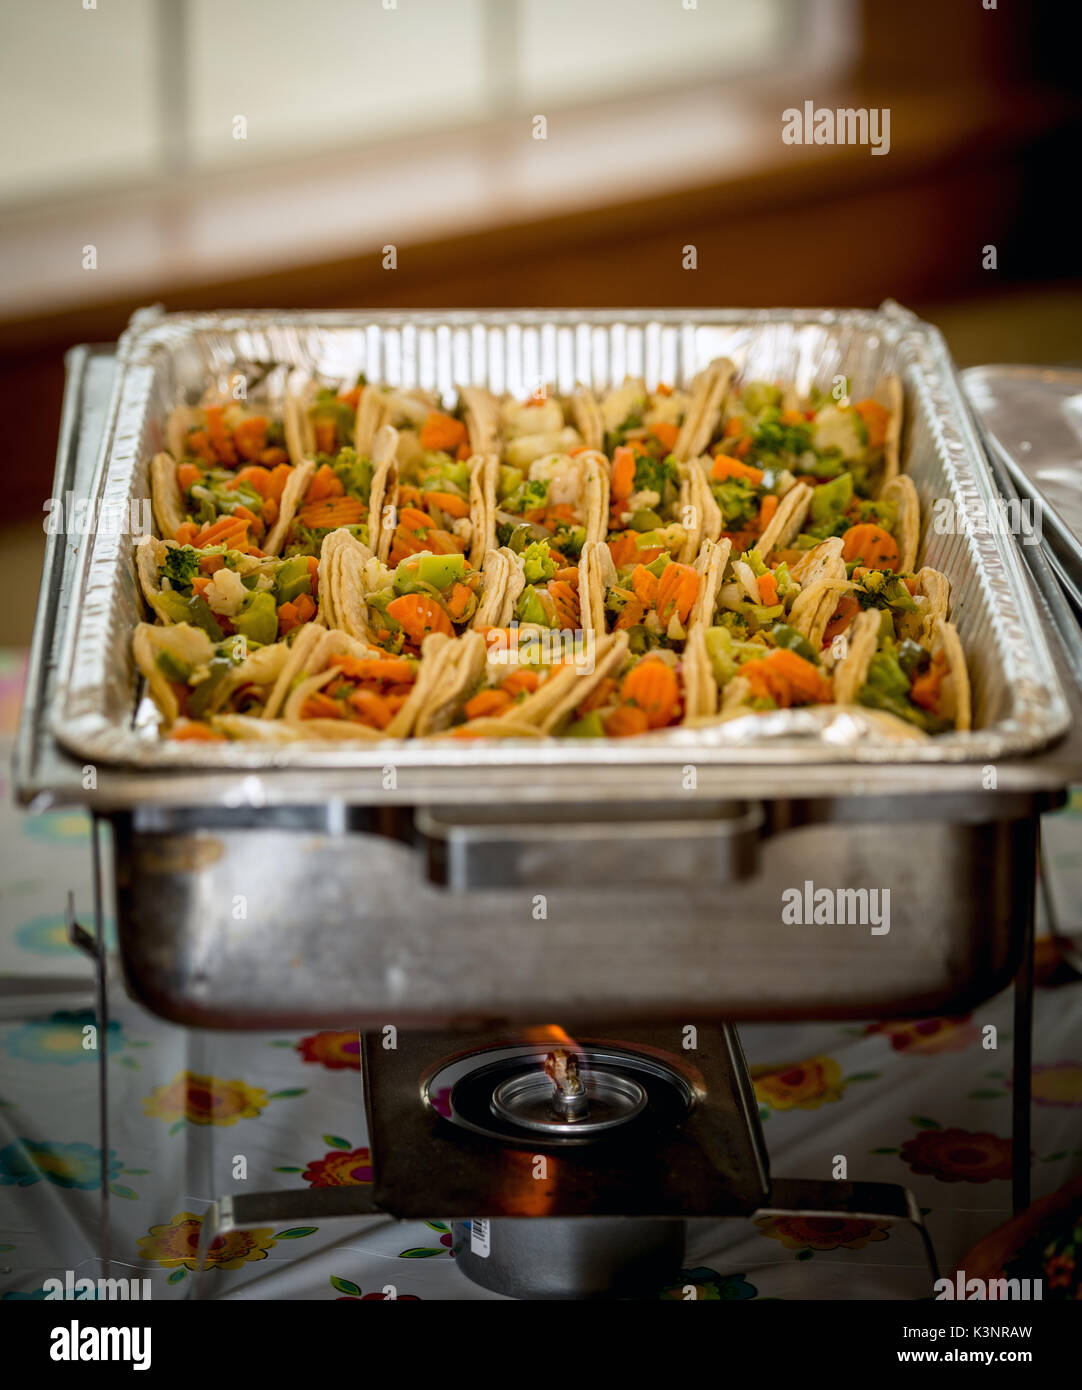 Burner flame keeps tacos warm until ready to eat Stock Photo